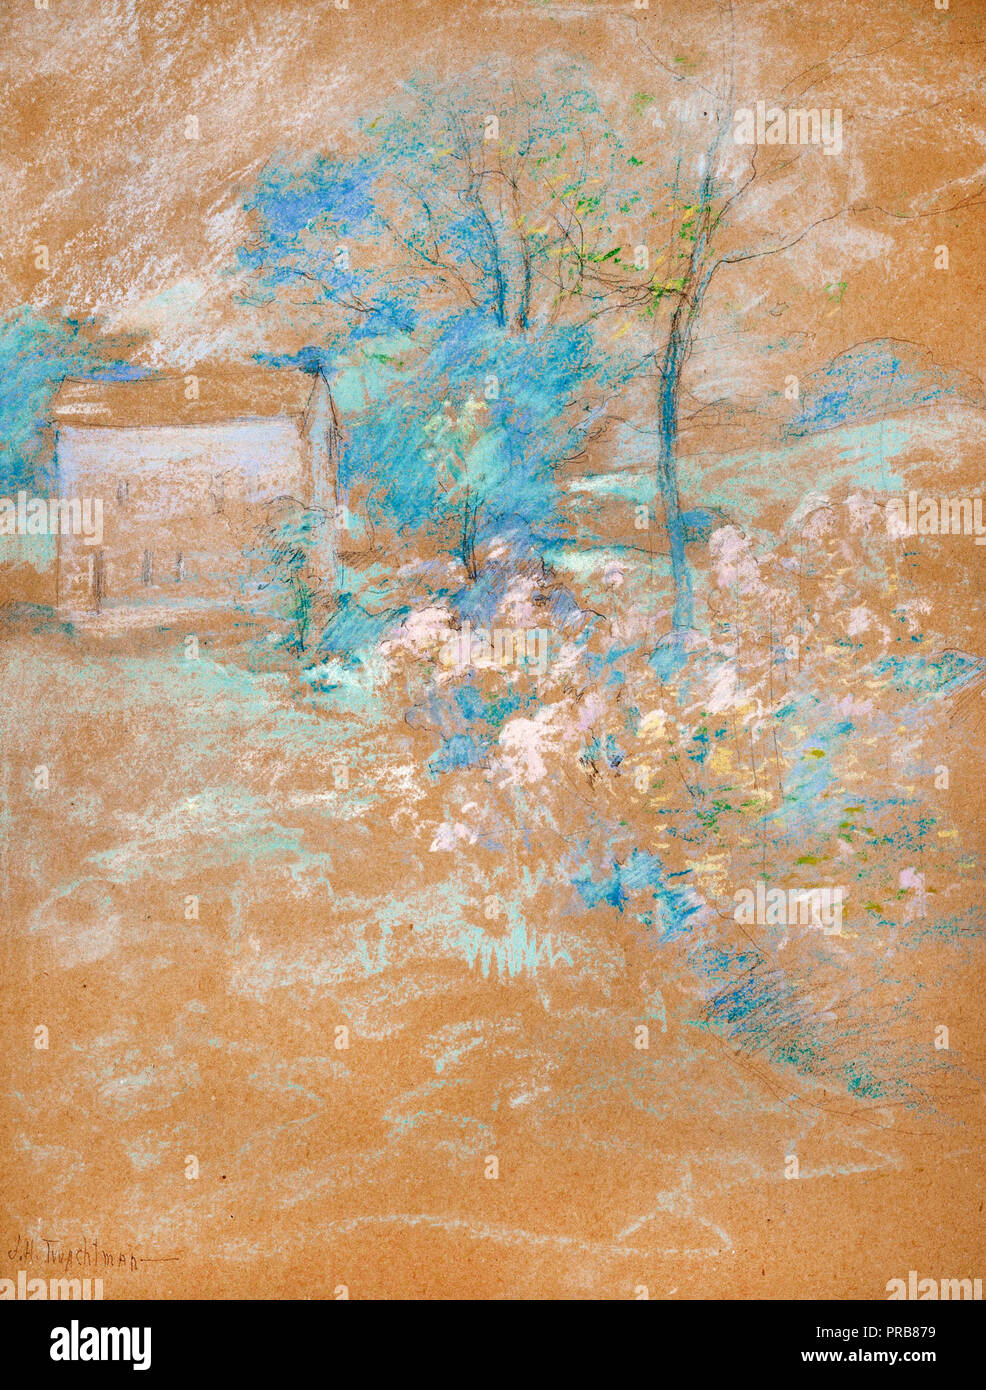 John Henry Twachtman, Spring, Undated, Pastel on paper, The Phillips Collection, Washington, D.C., USA. Stock Photo